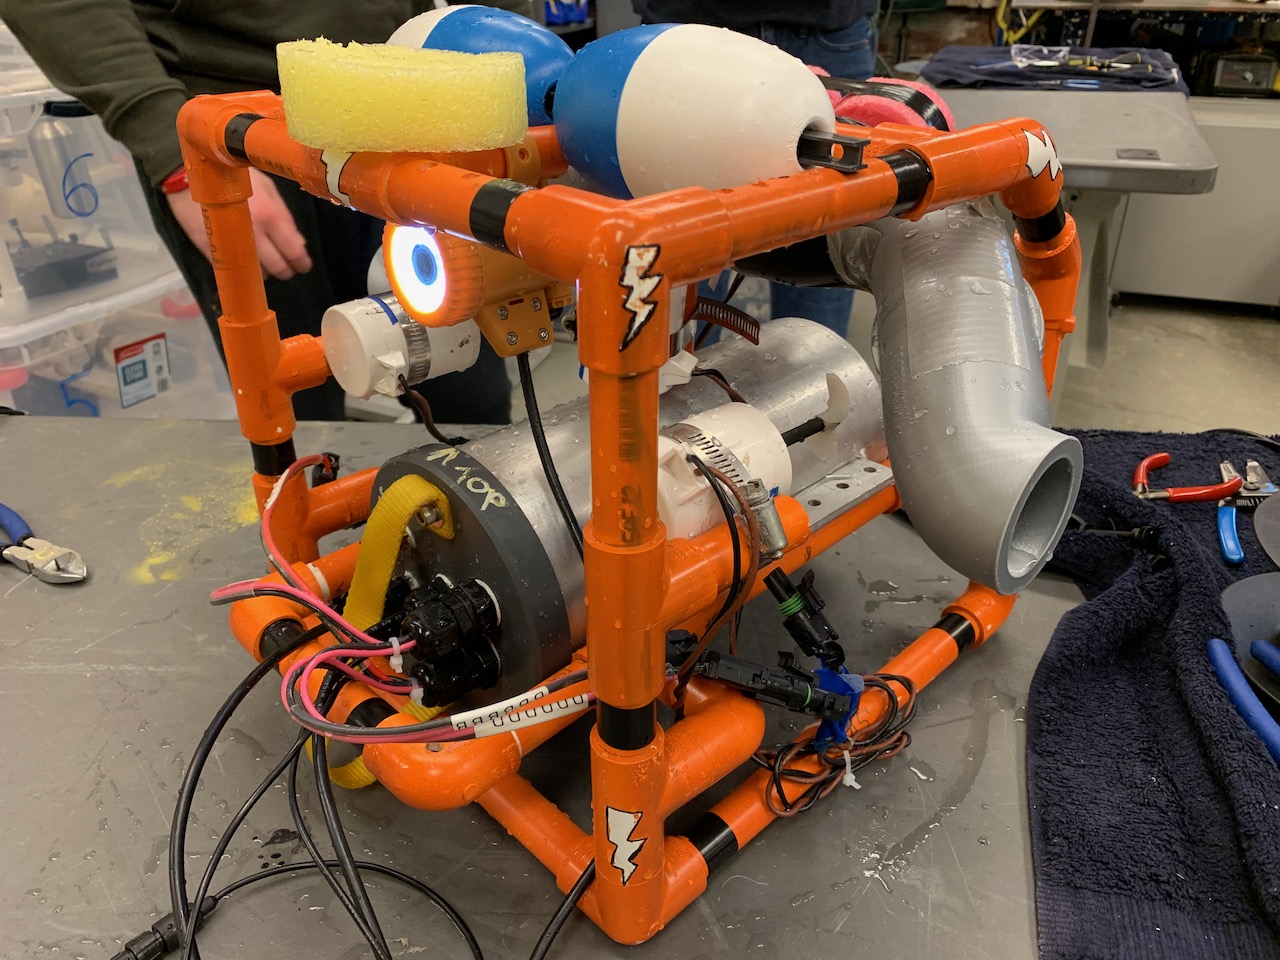 Example remotely operated vehicle on work bench